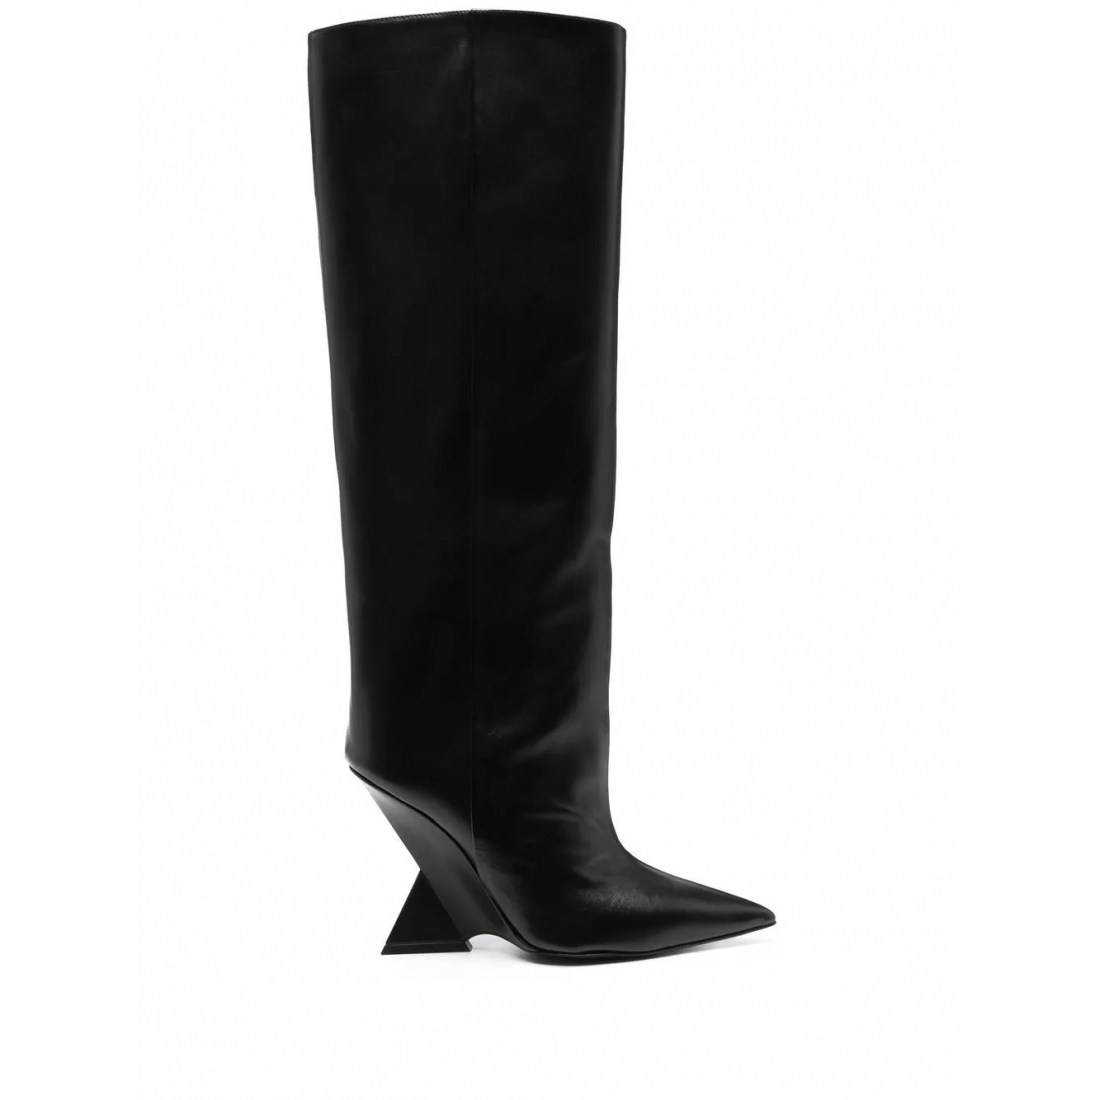 Women's 'Cheope' Long Boots